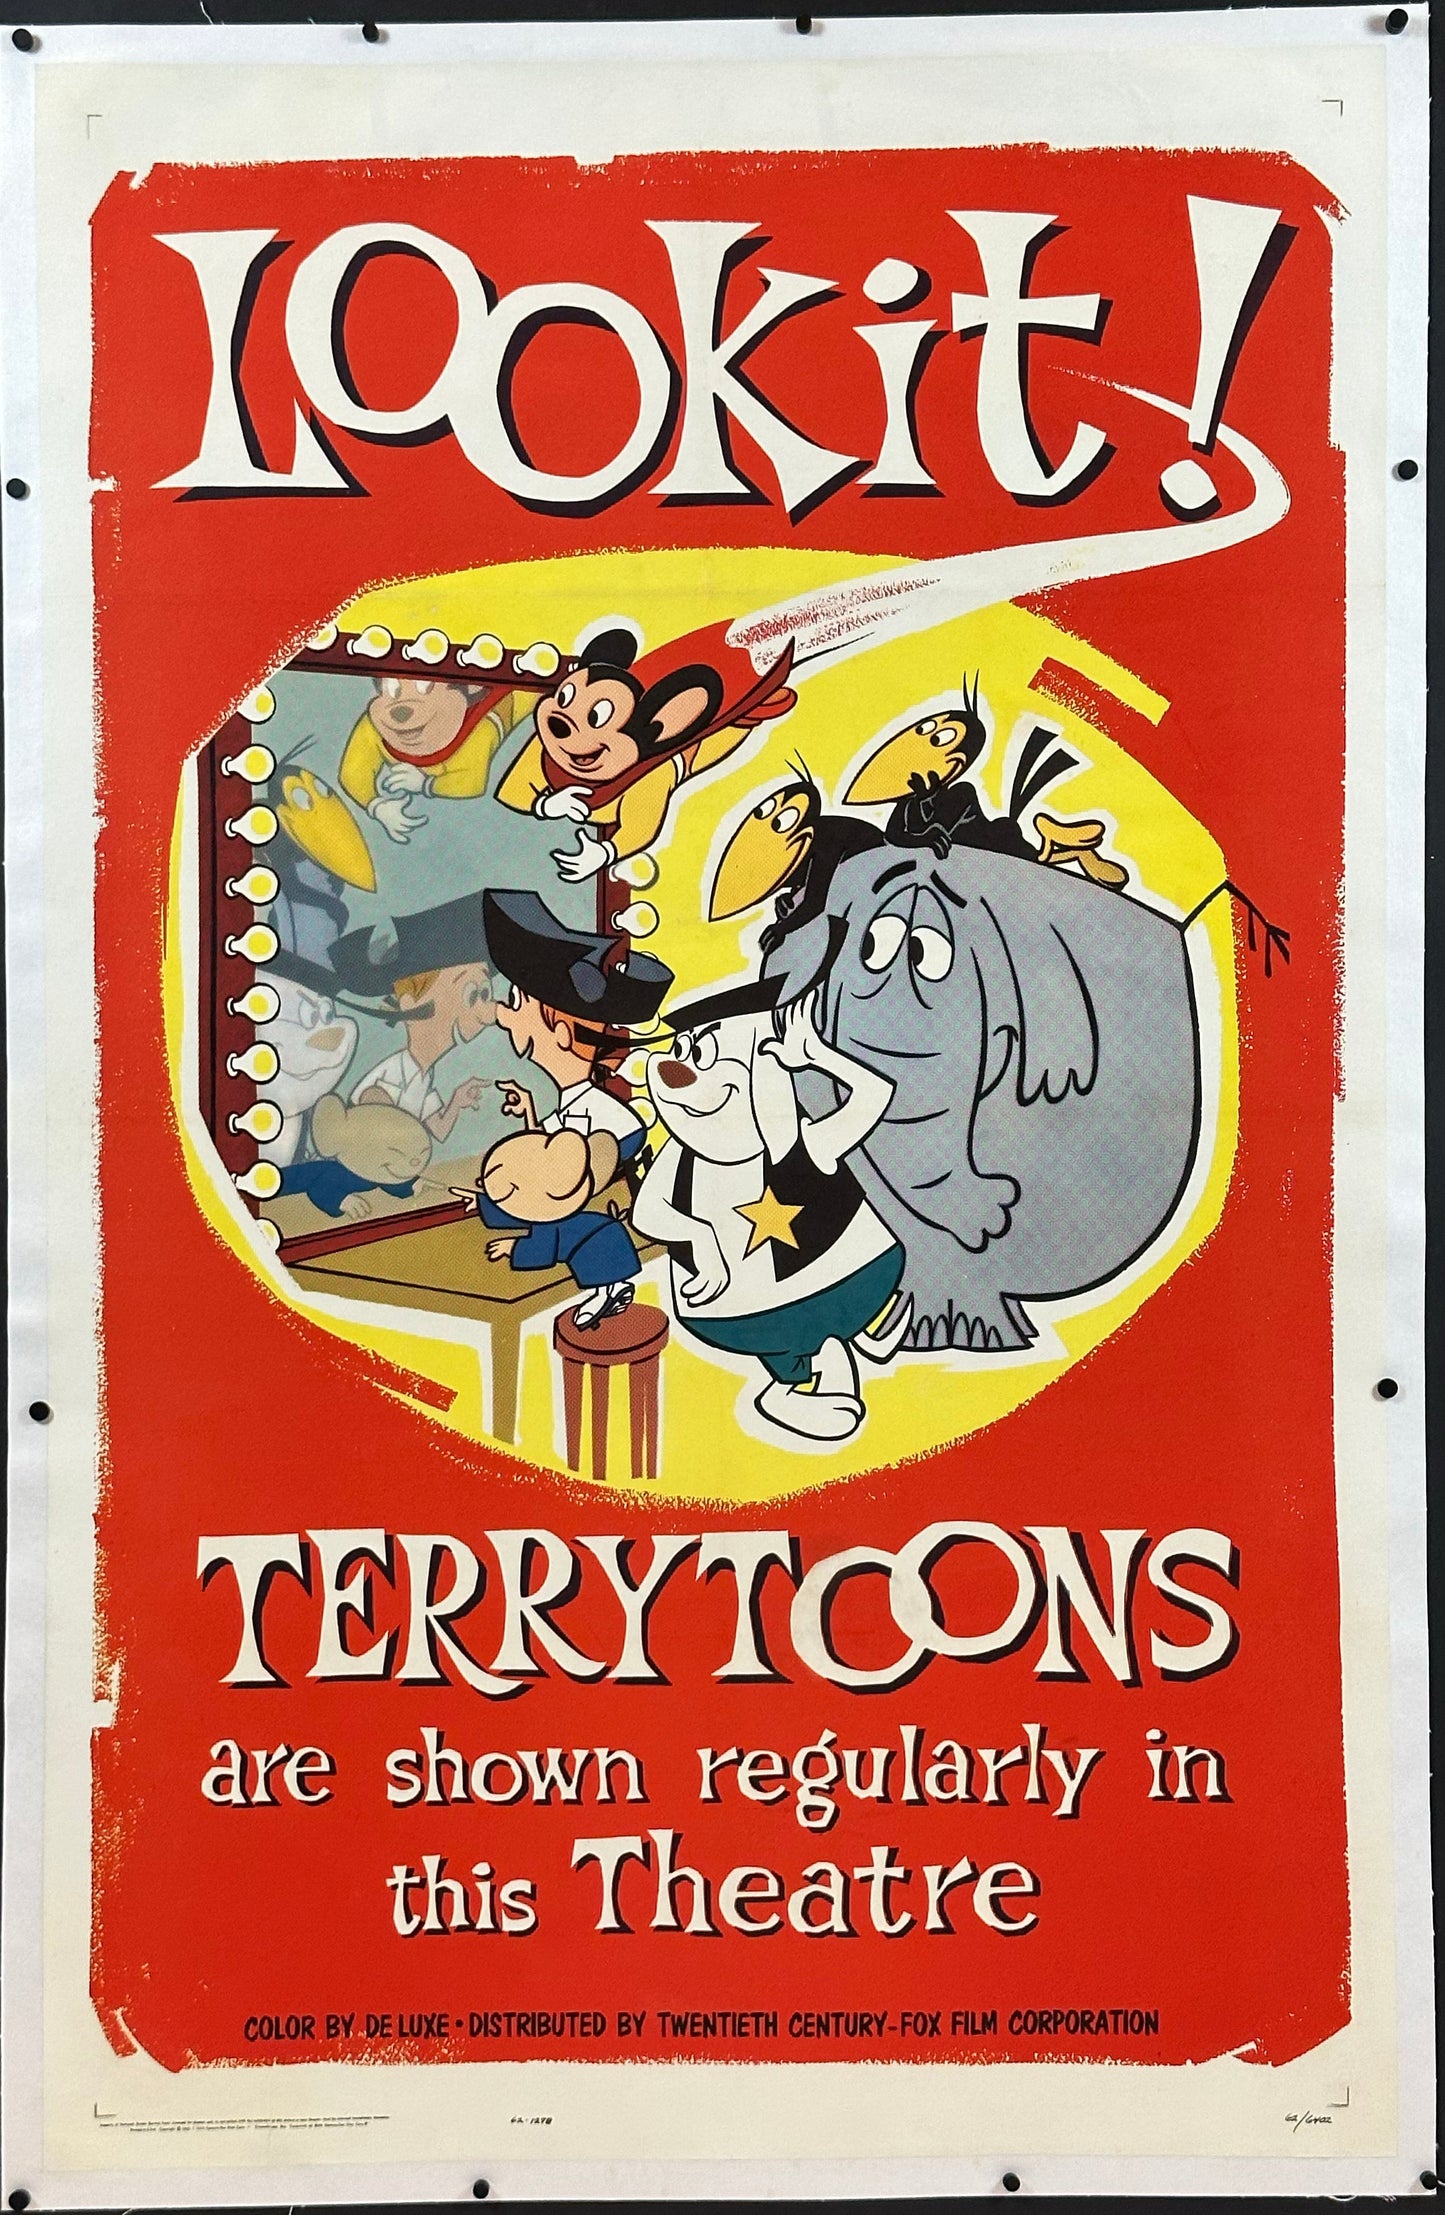 Terrytoons Stock US One Sheet (1962) - ORIGINAL RELEASE - posterpalace.com